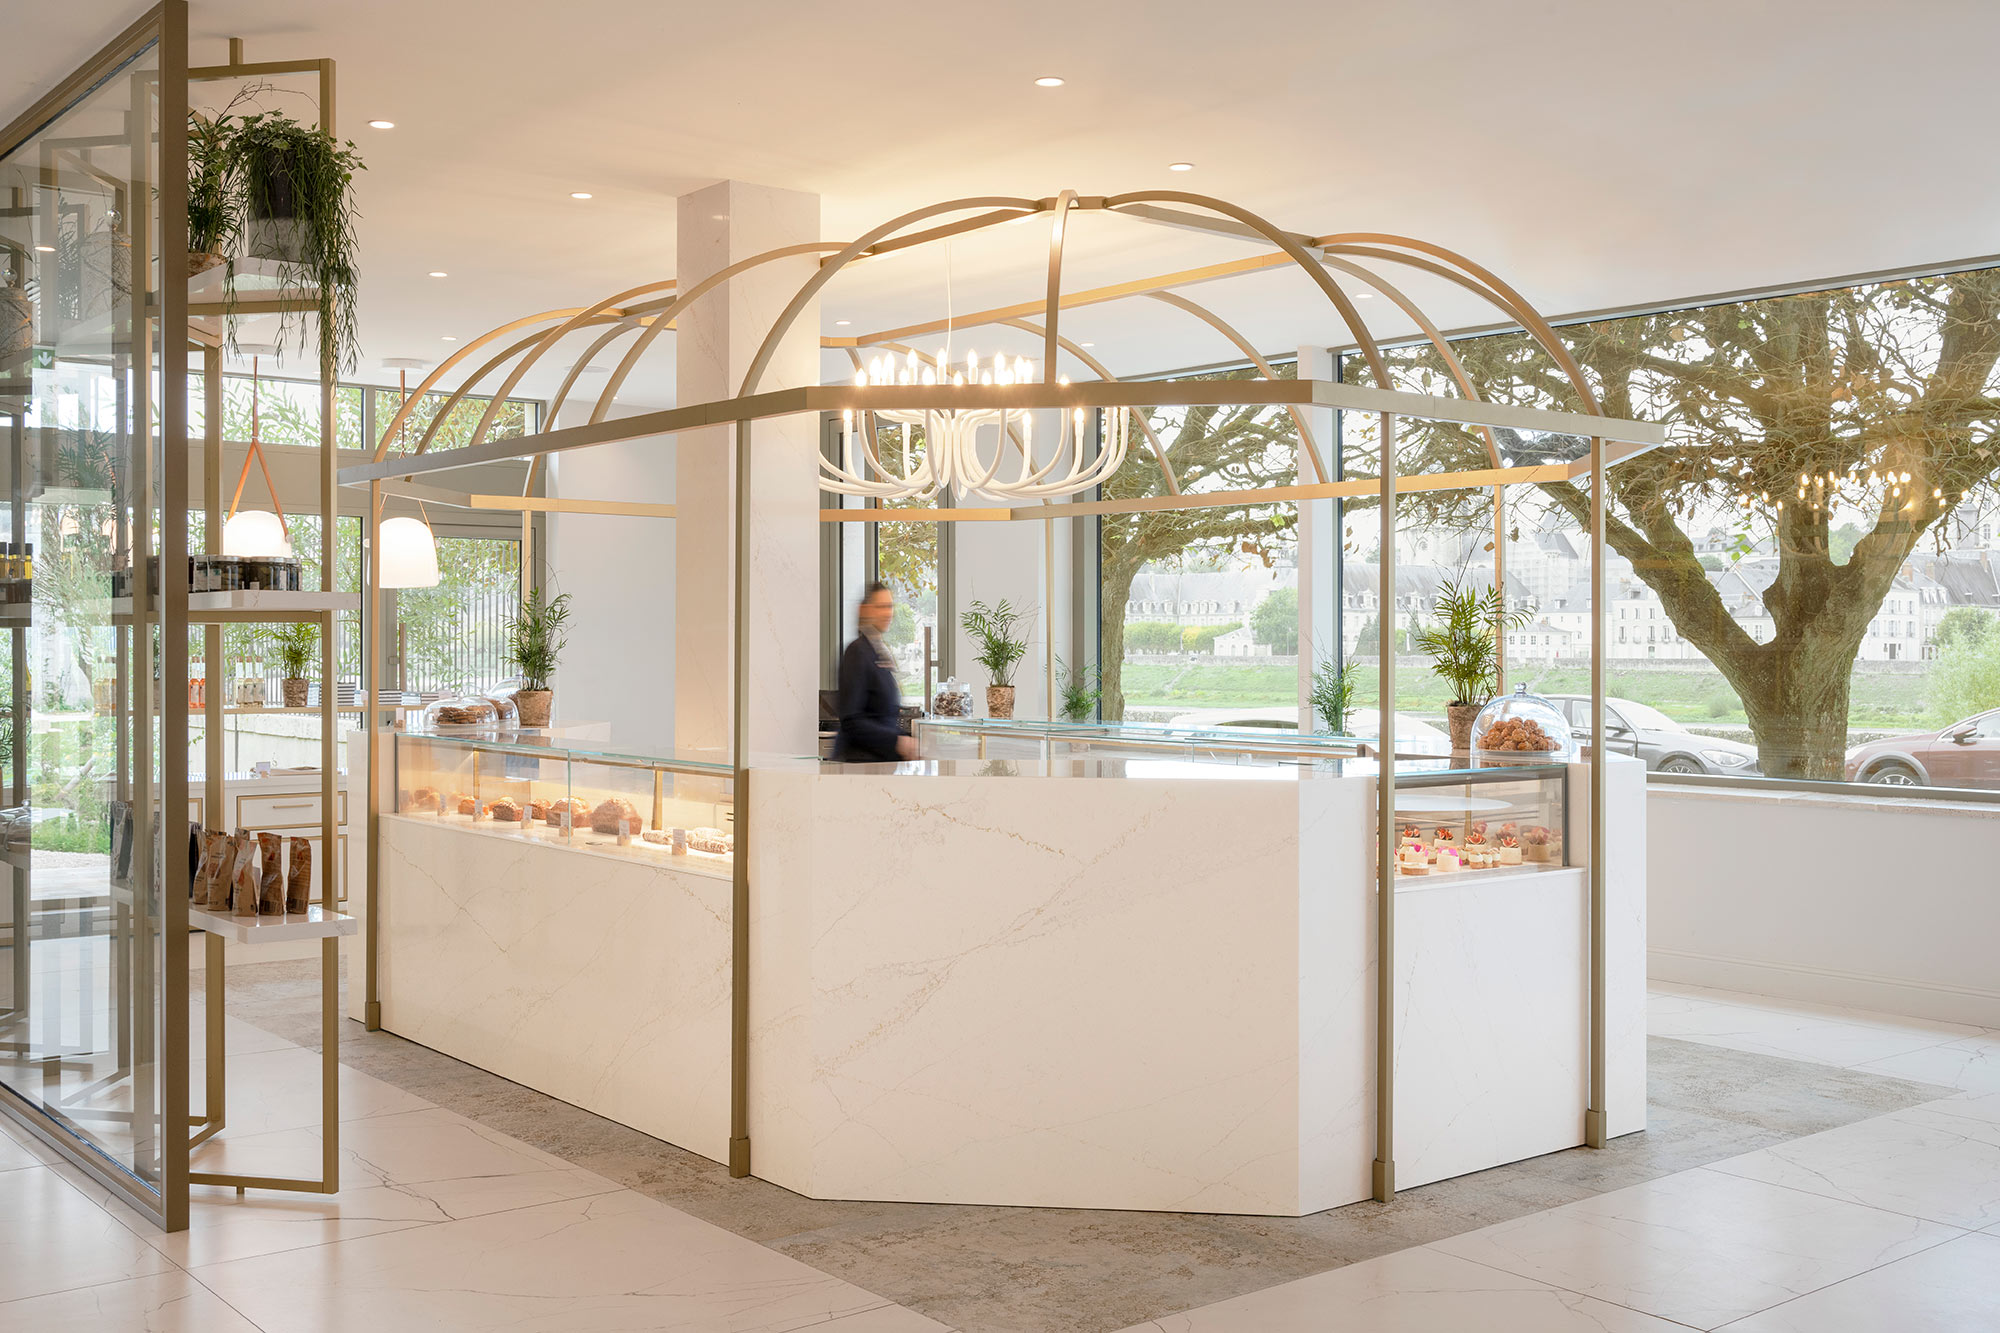 Image of Hotel Fleur de Loire 10 in The sophistication and strength of Cosentino brands for award-winning chef Christophe Hay’s new 5-star hotel  - Cosentino